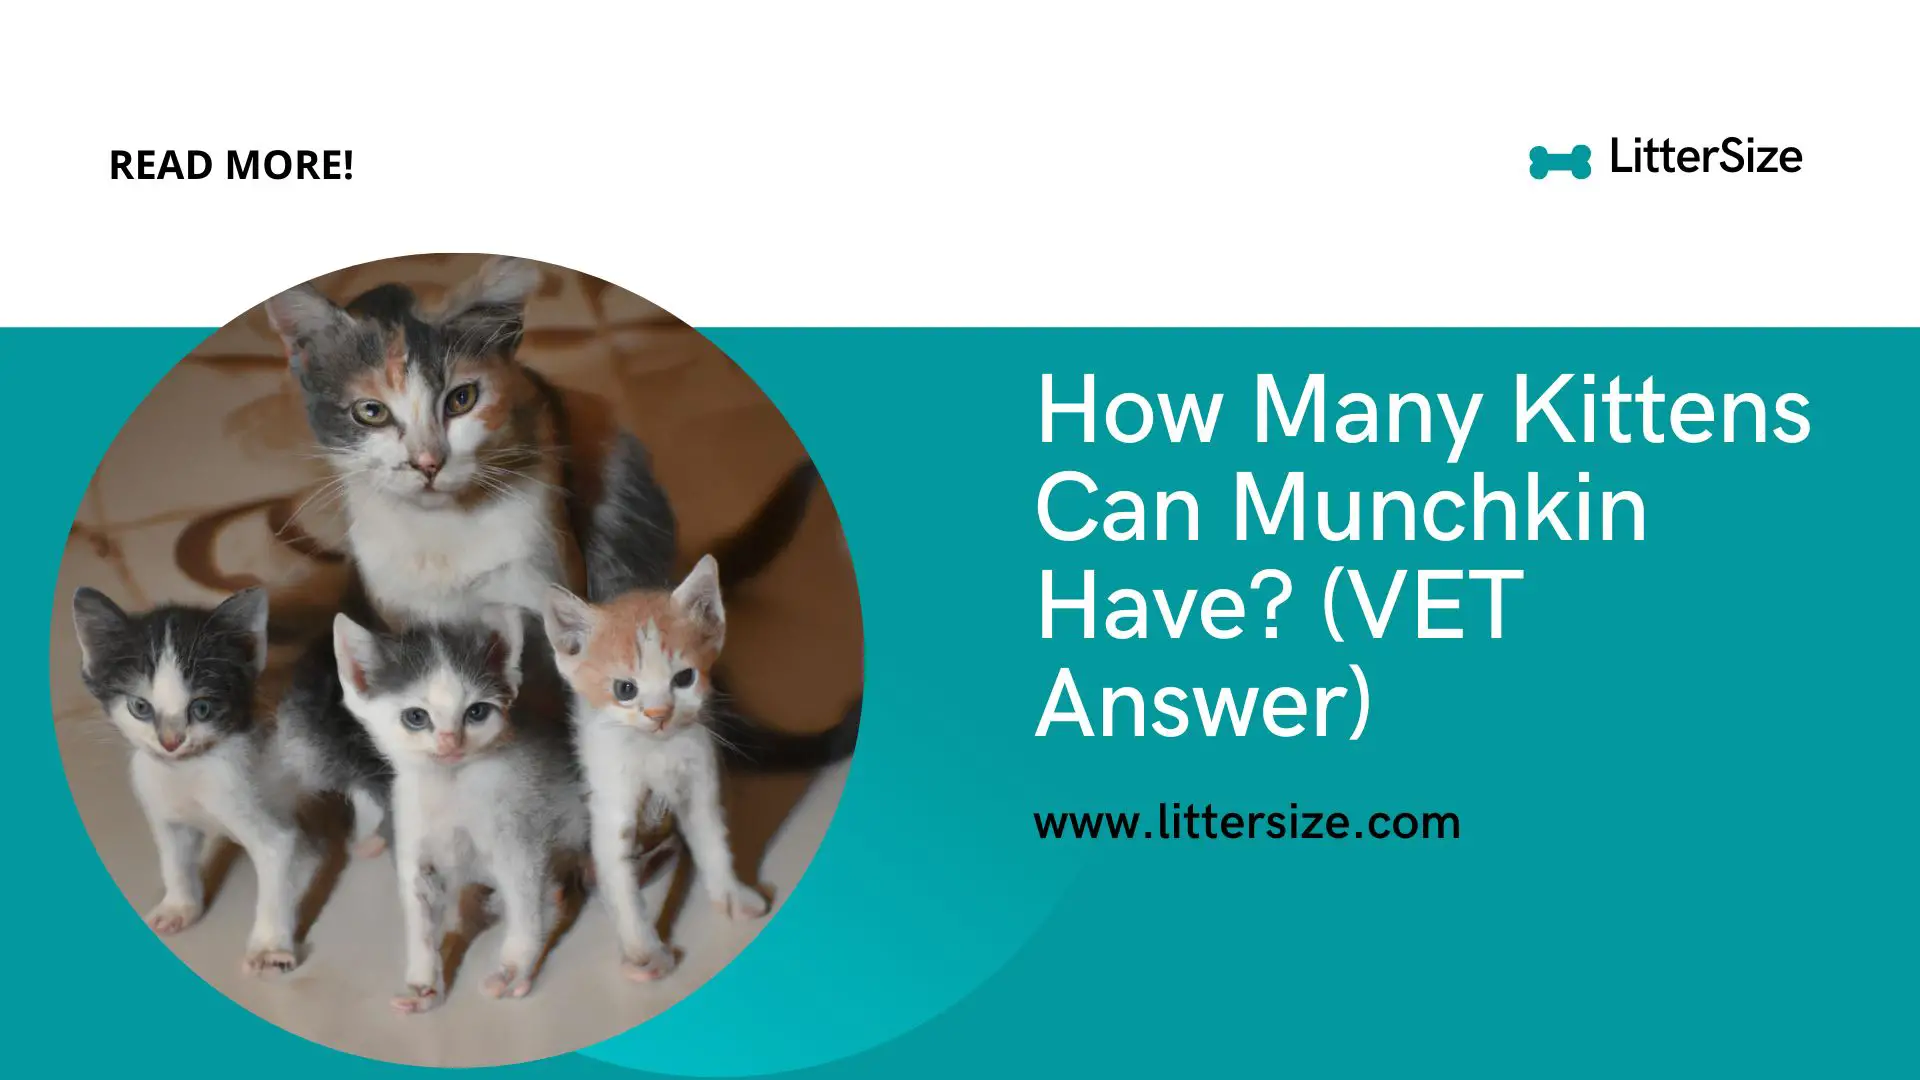 How Many Kittens Can Munchkin Have? (VET Answer)